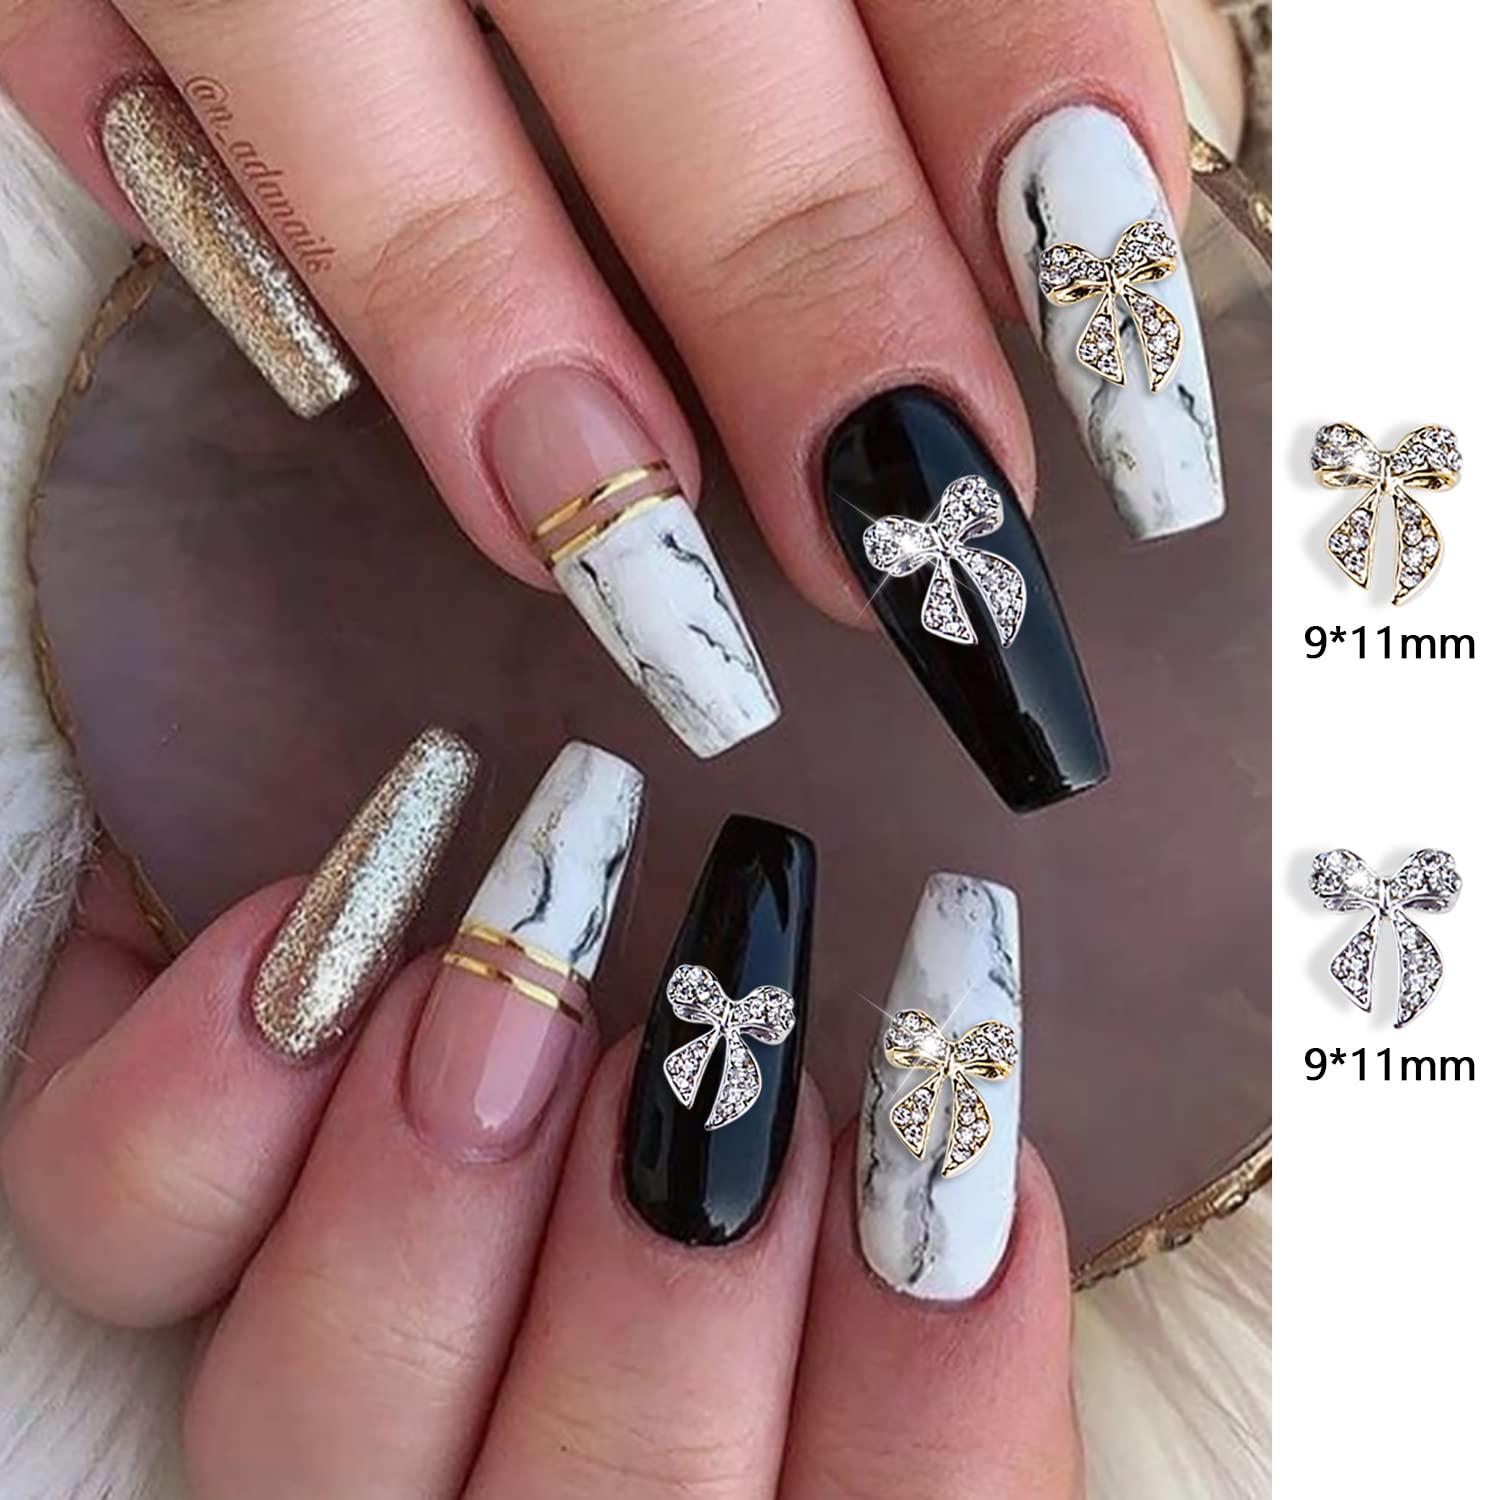 WGOMM - Star / Bow Nail Art Stickers | YesStyle